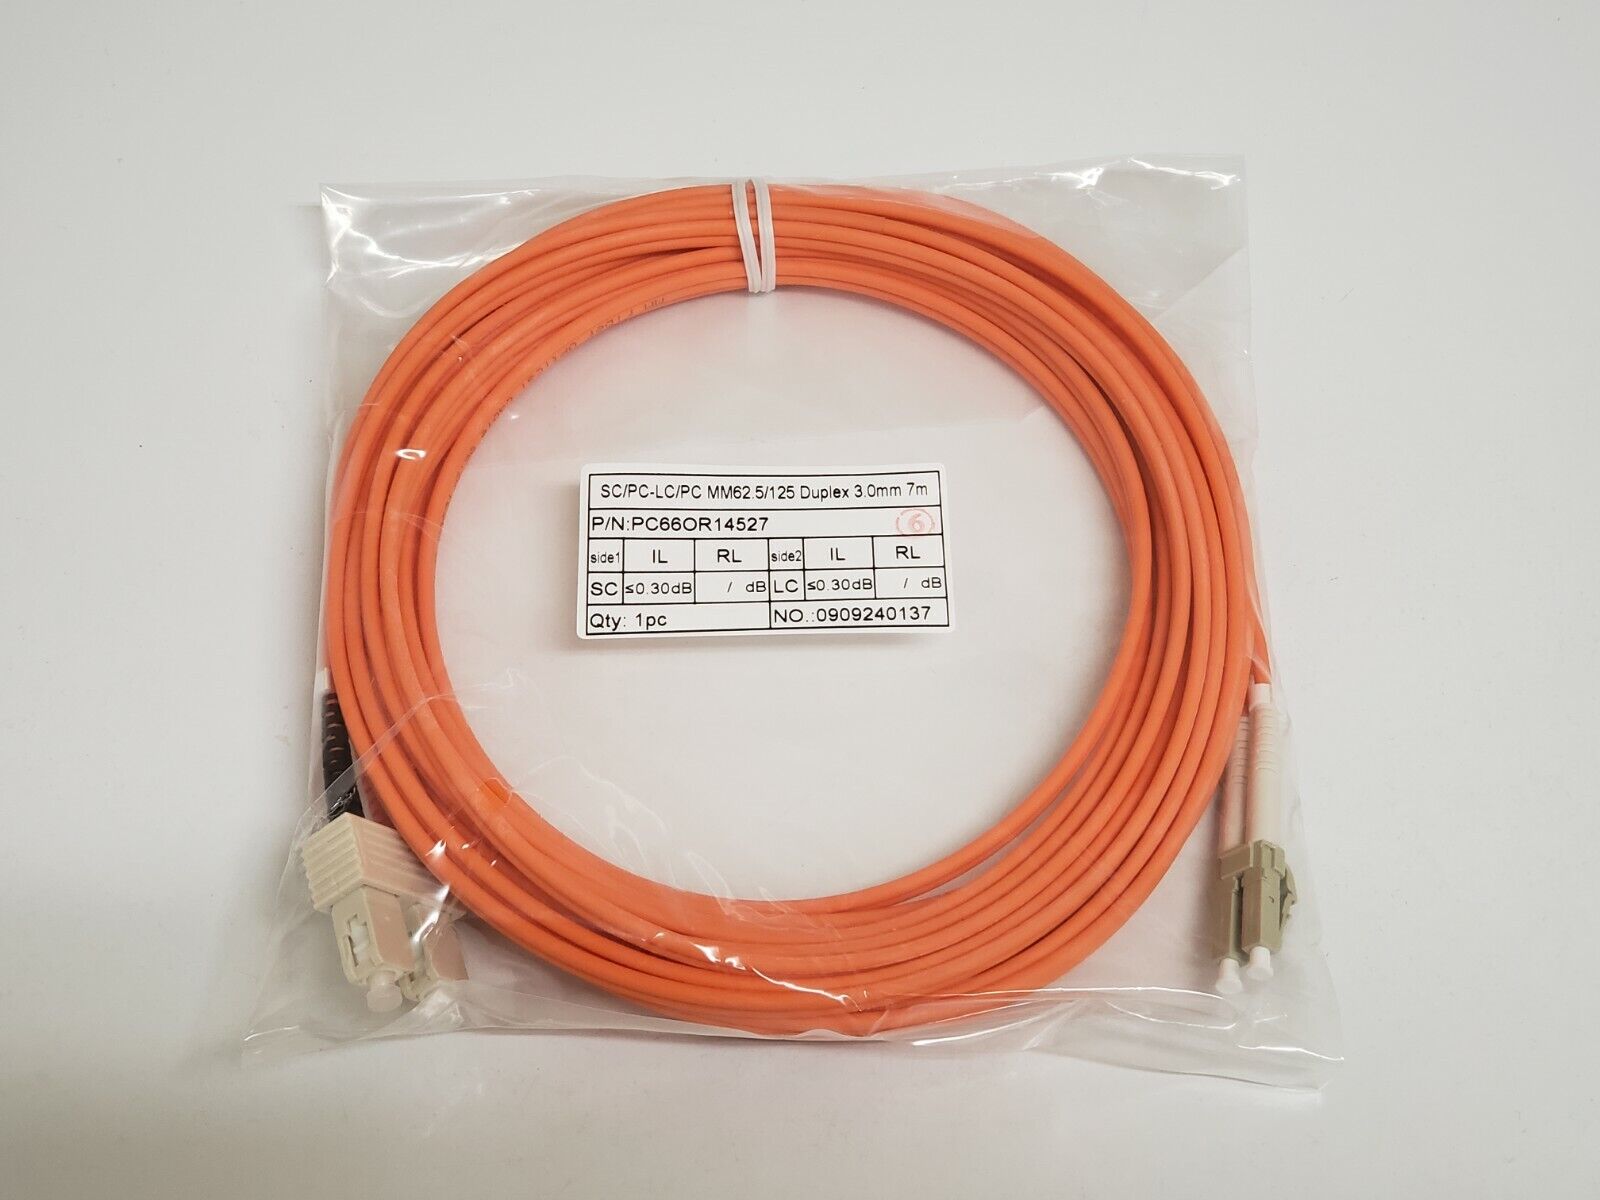 SC/PC-LC/PC MM 62.5/125 Duplex 3.0mm 7M SC to LC MMF Fiber Optic patch cable NEW